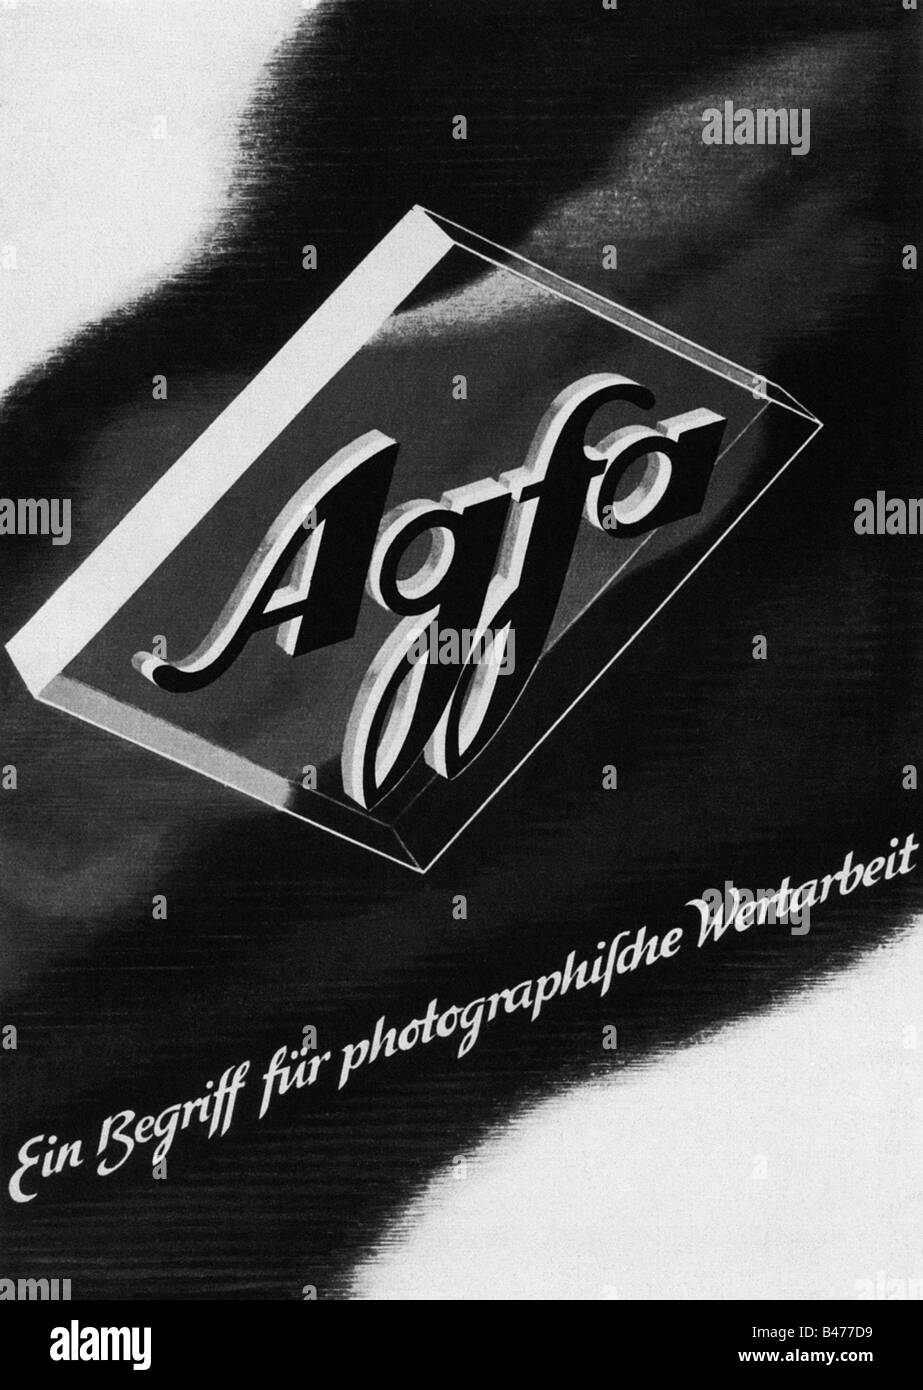 Agfa Y8622 Billy Or Appareils Photo Agfa Advertising D'Epoca 1933 Old Advertising 